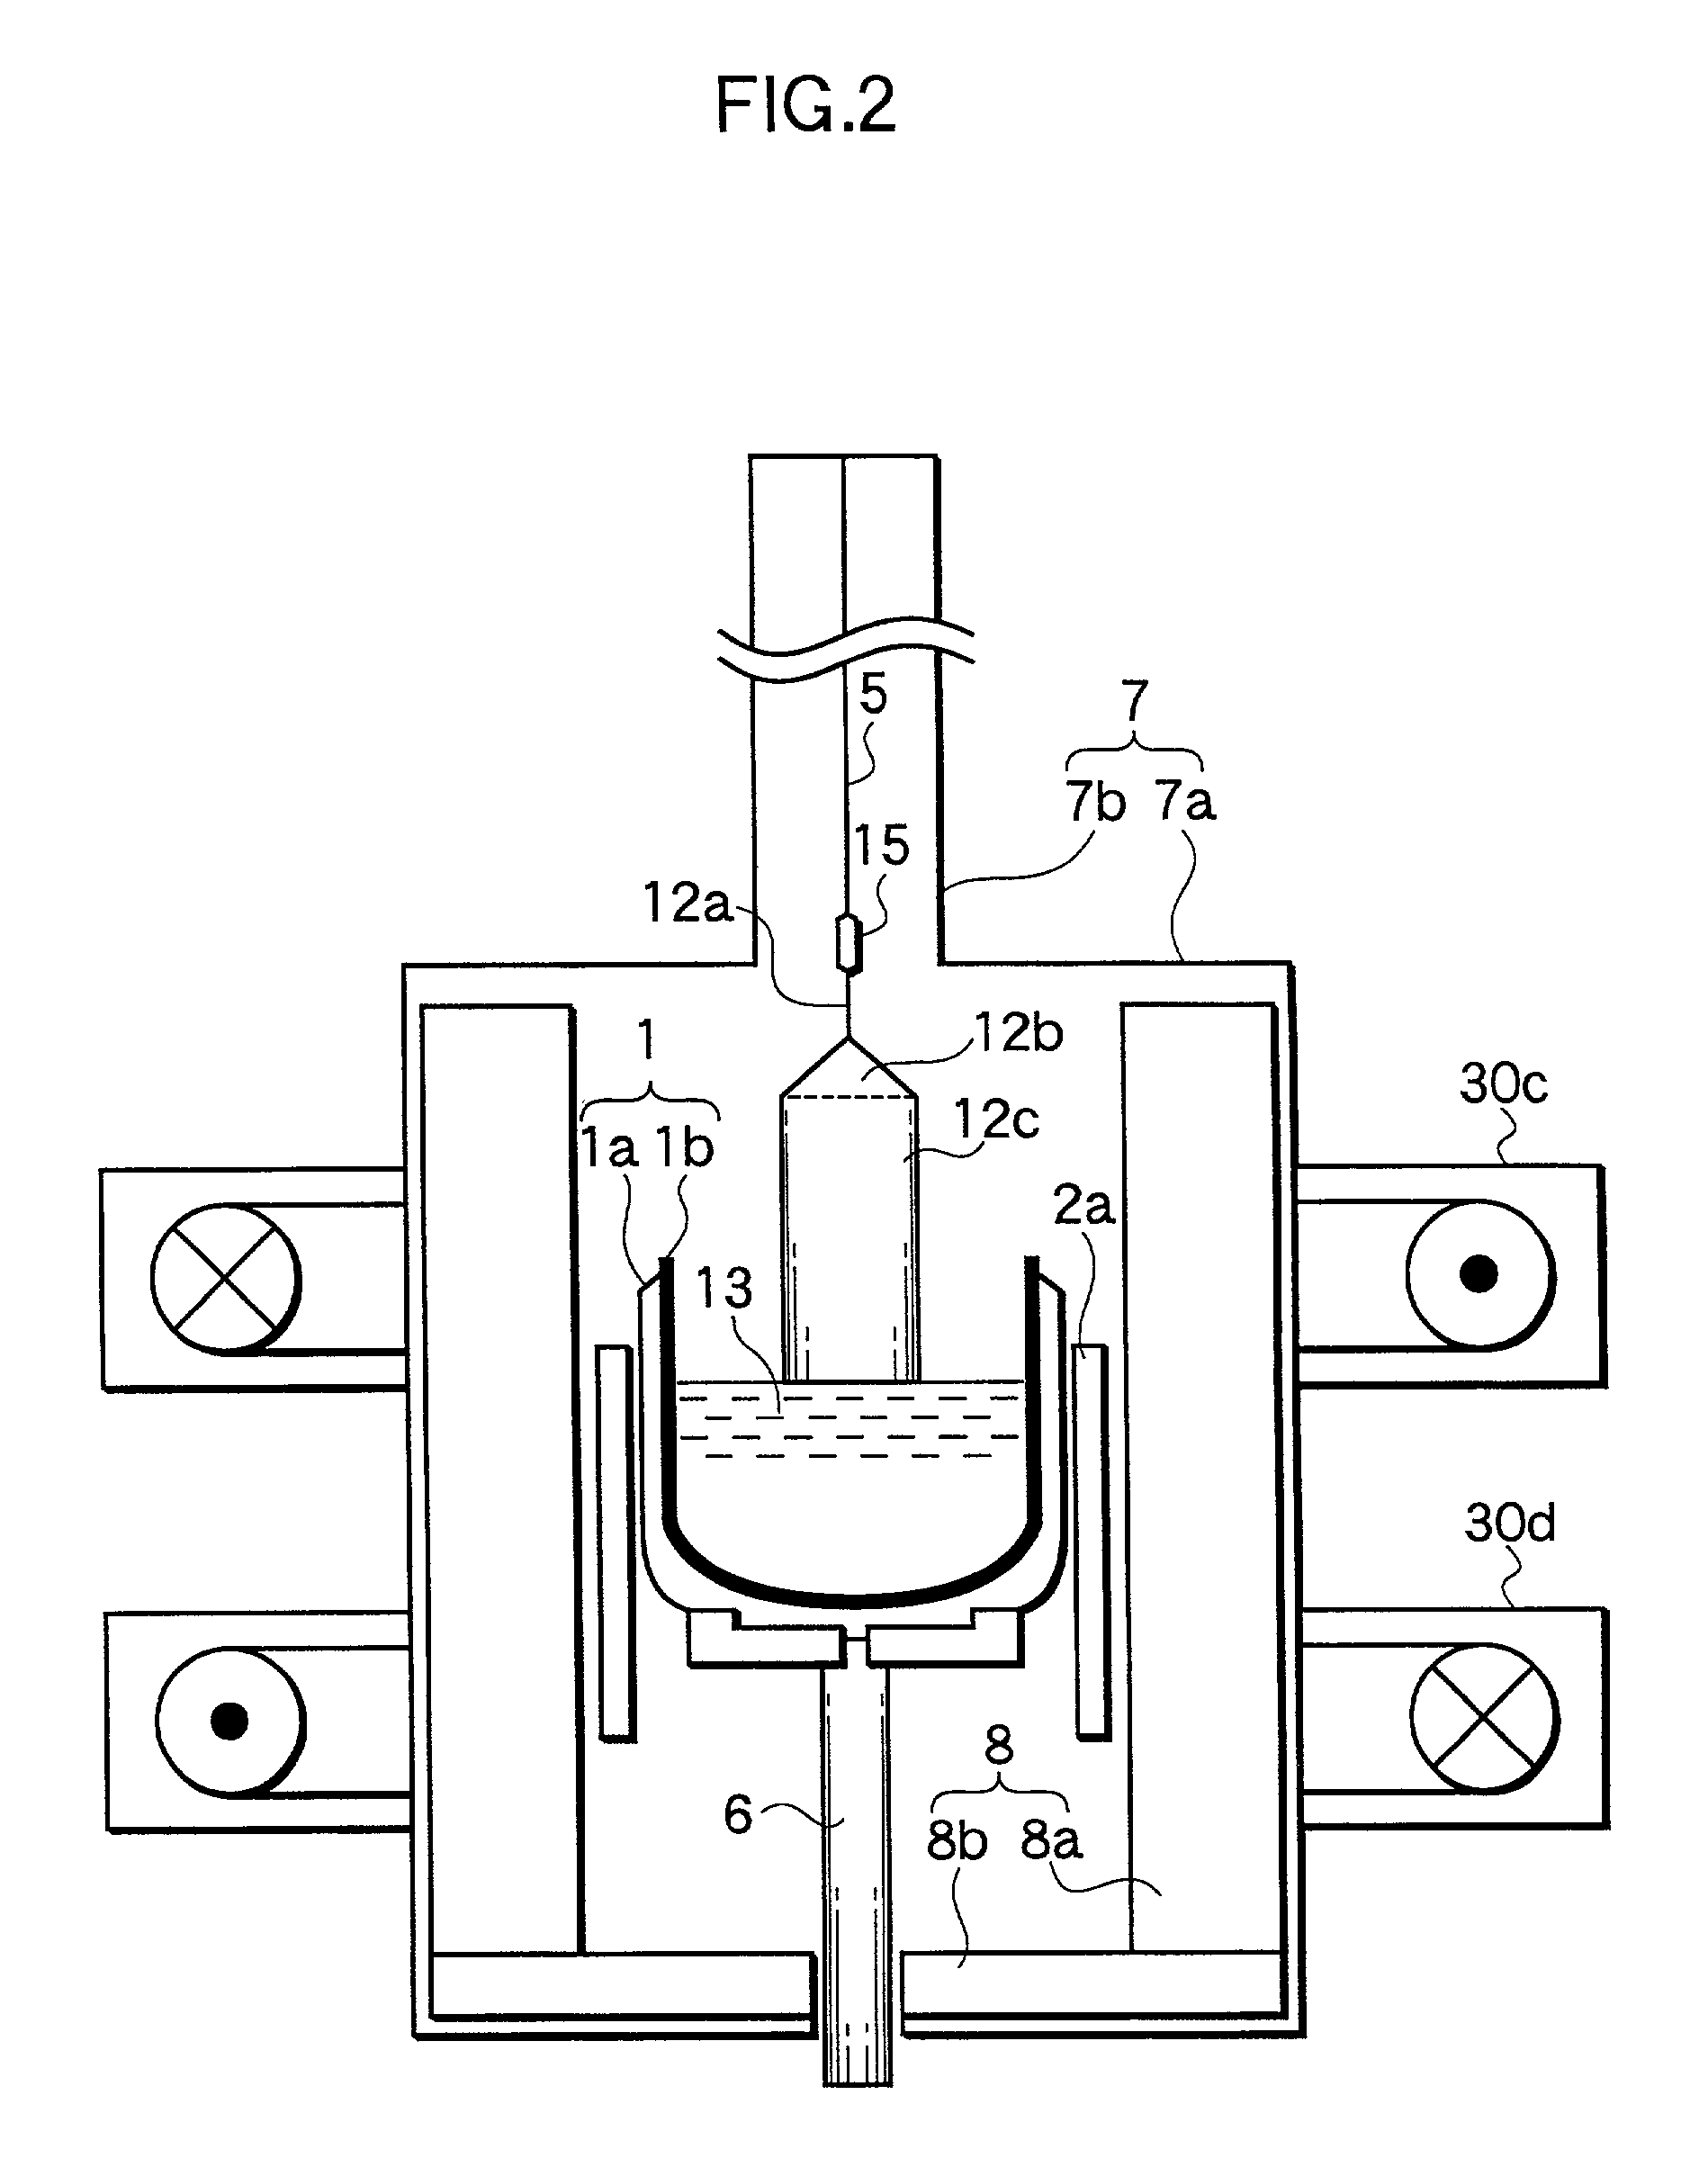 Method for producing silicon single crystal